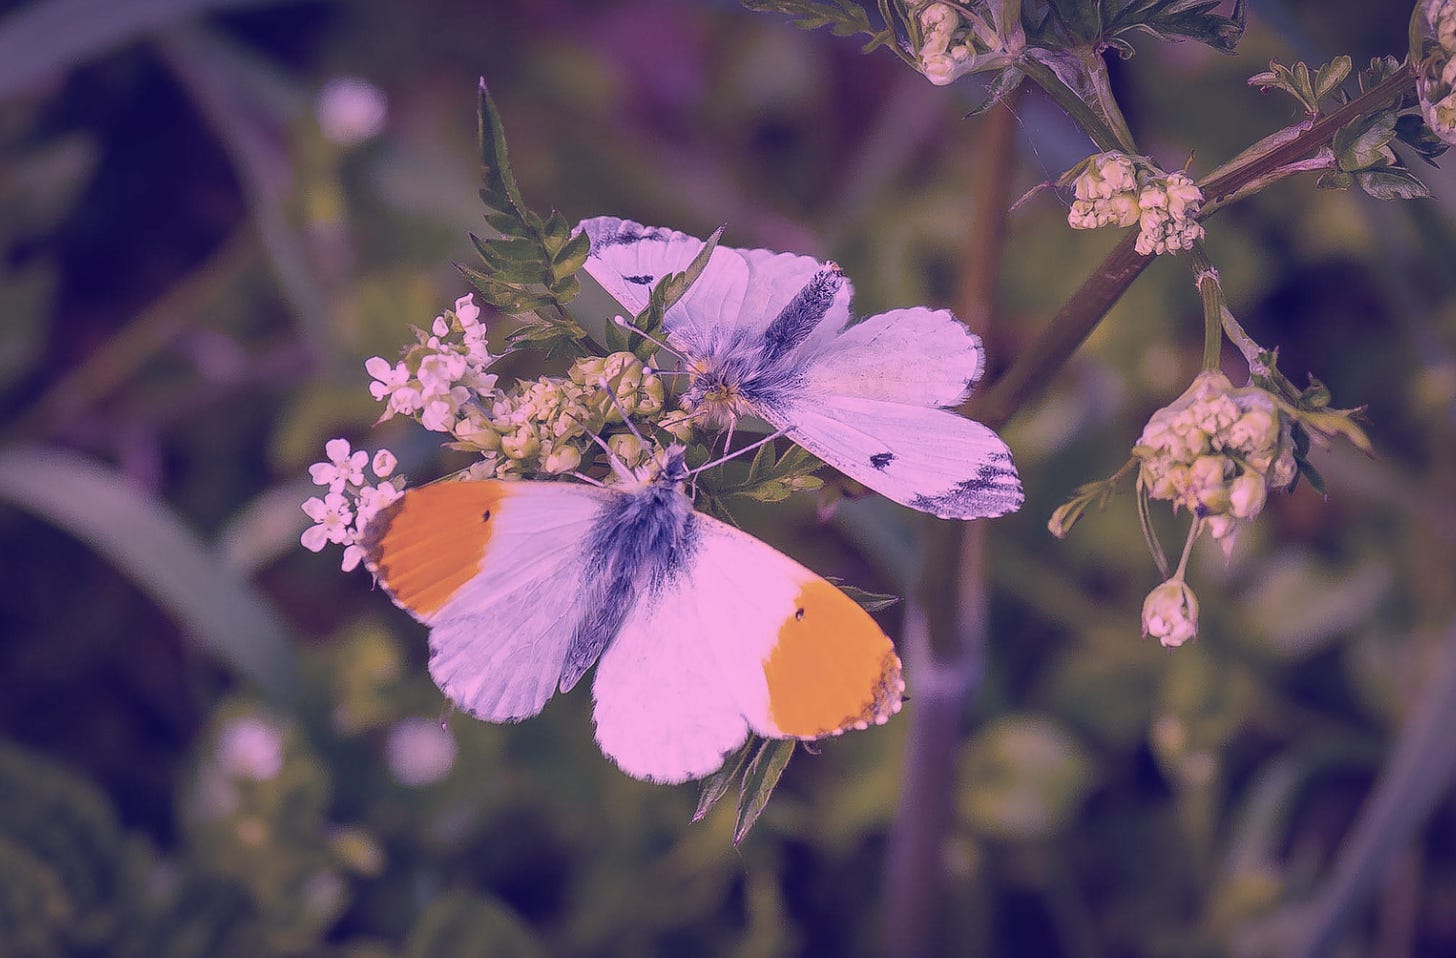 two Orange-tip butterflies on a flower before blurred leaves. a pink tint is over the image